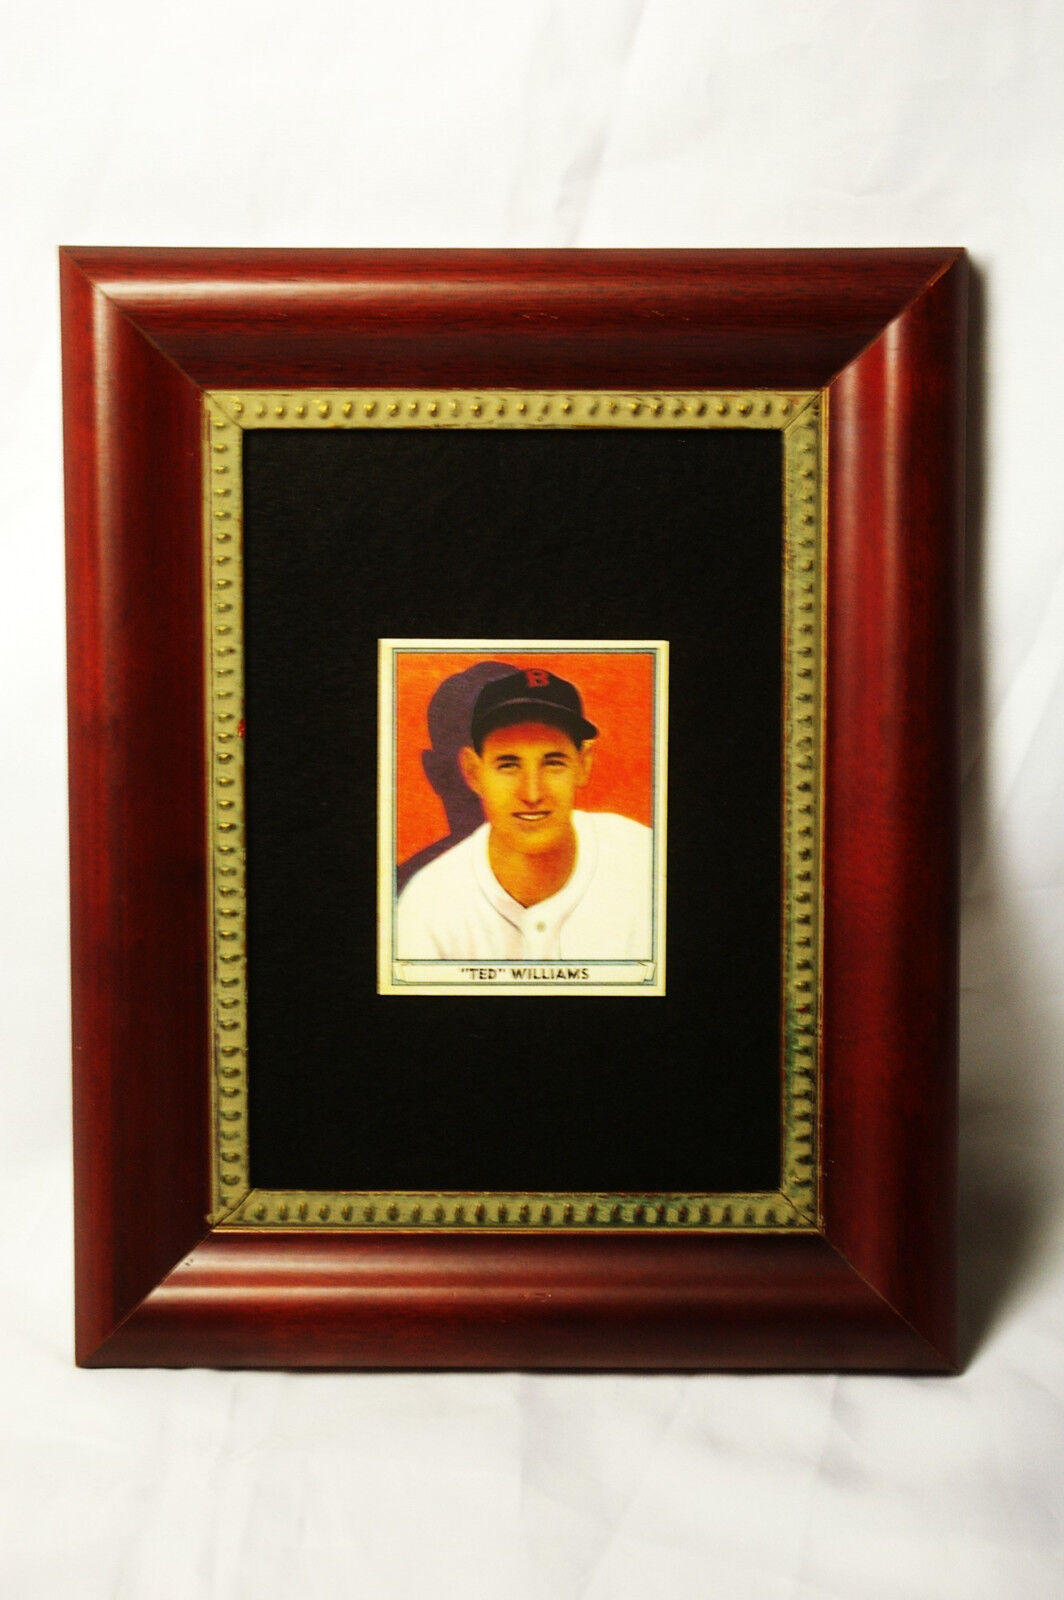 Ted Williams 1941 Playball RP SPortrait Old Red Sox Baseball Card Antique Frame